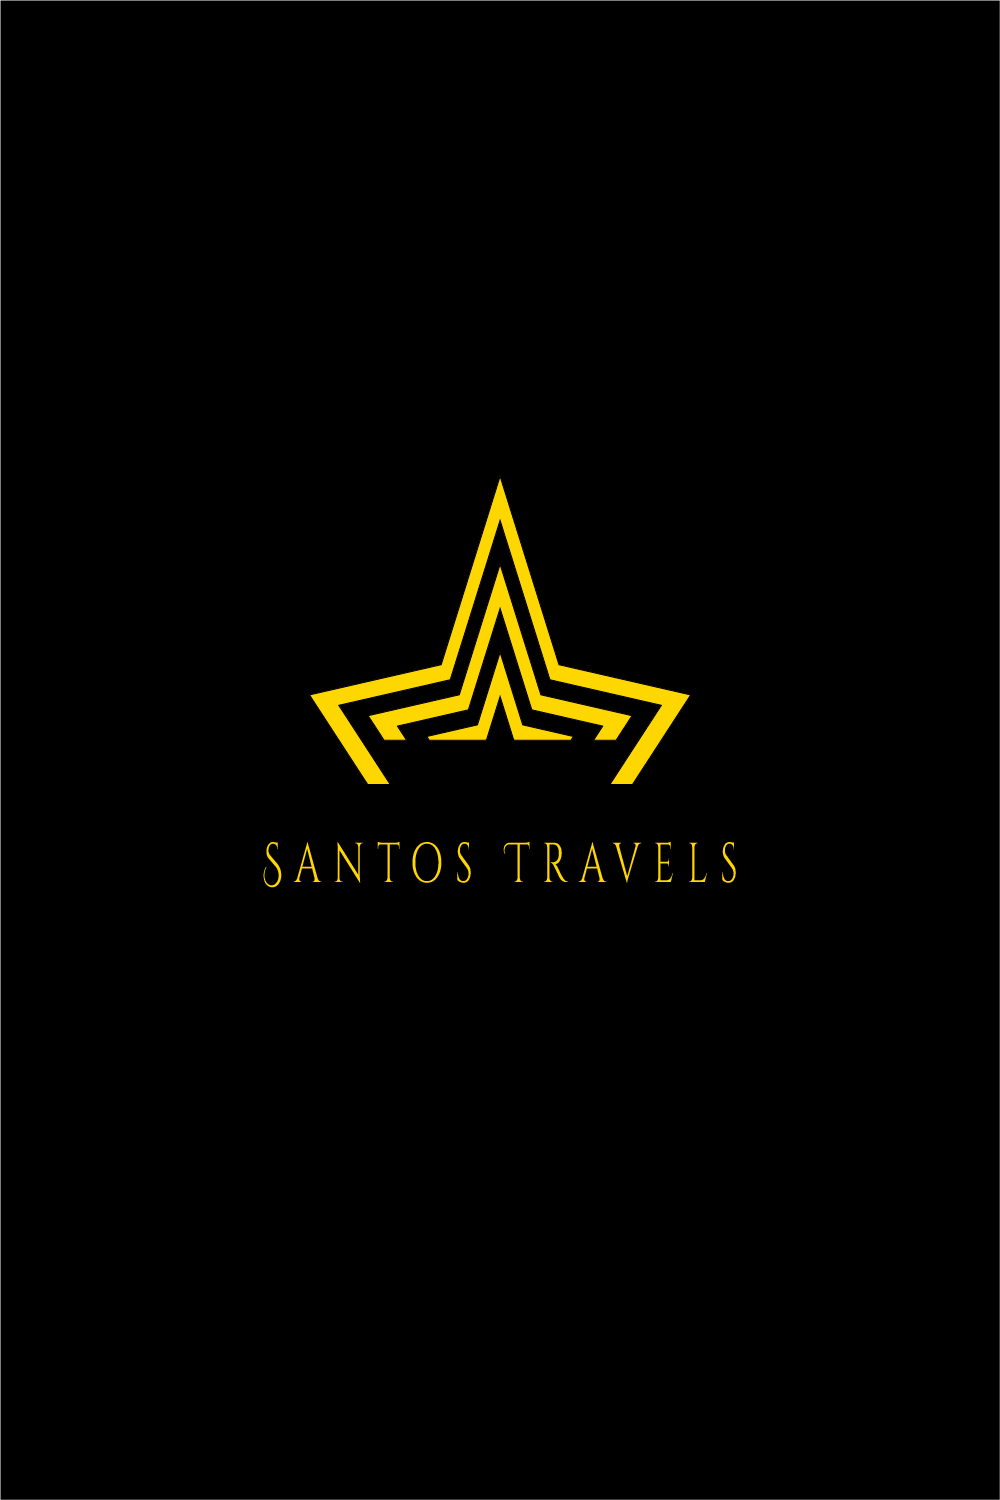 Golden logo with a black background.